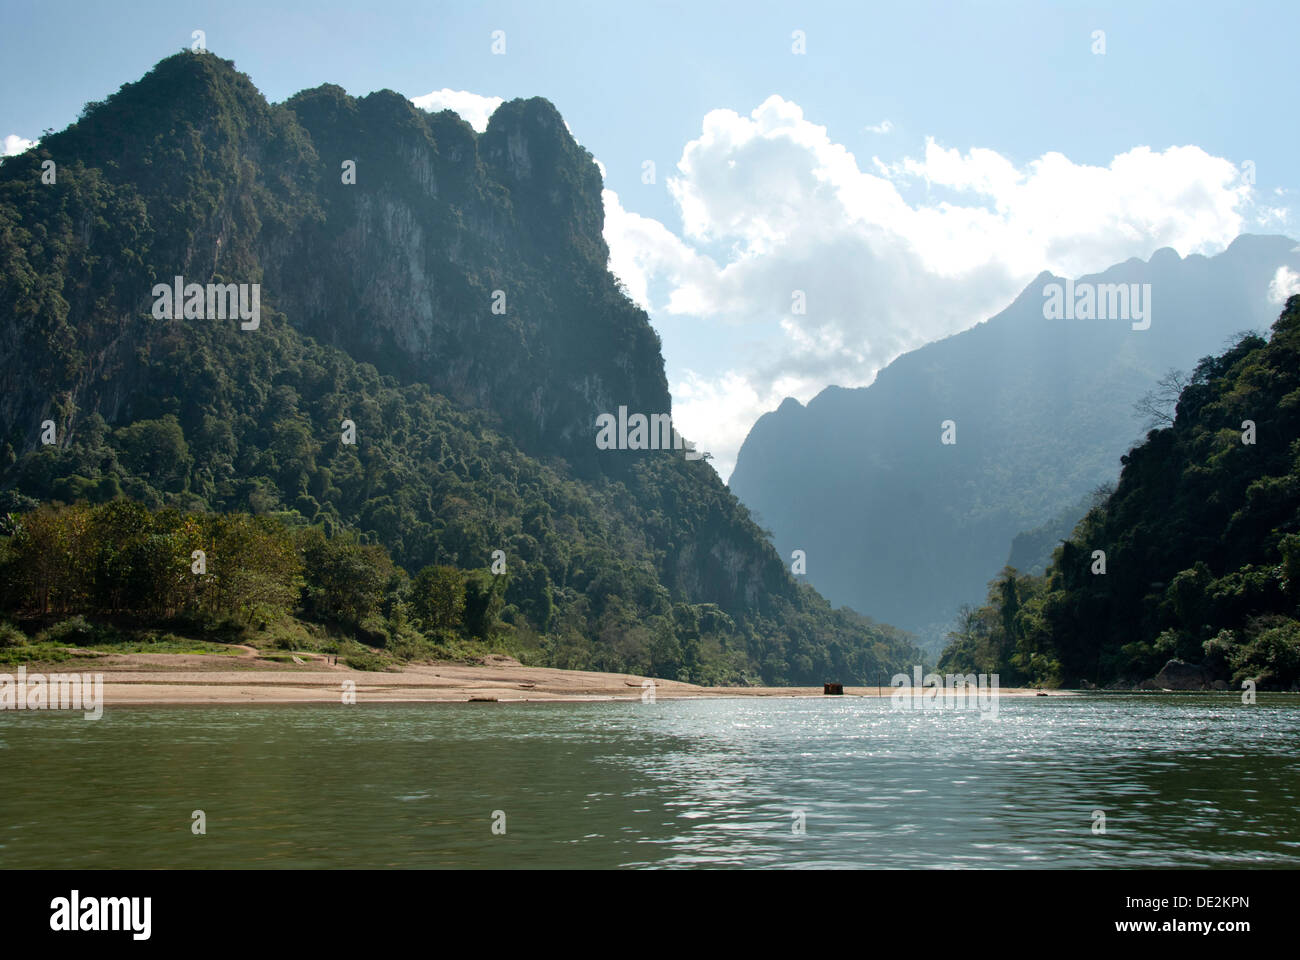 Karst landscape, forested mountains on the Nam Ou River in Muang Ngoi Kao, Luang Prabang province, Laos, Southeast Asia, Asia Stock Photo